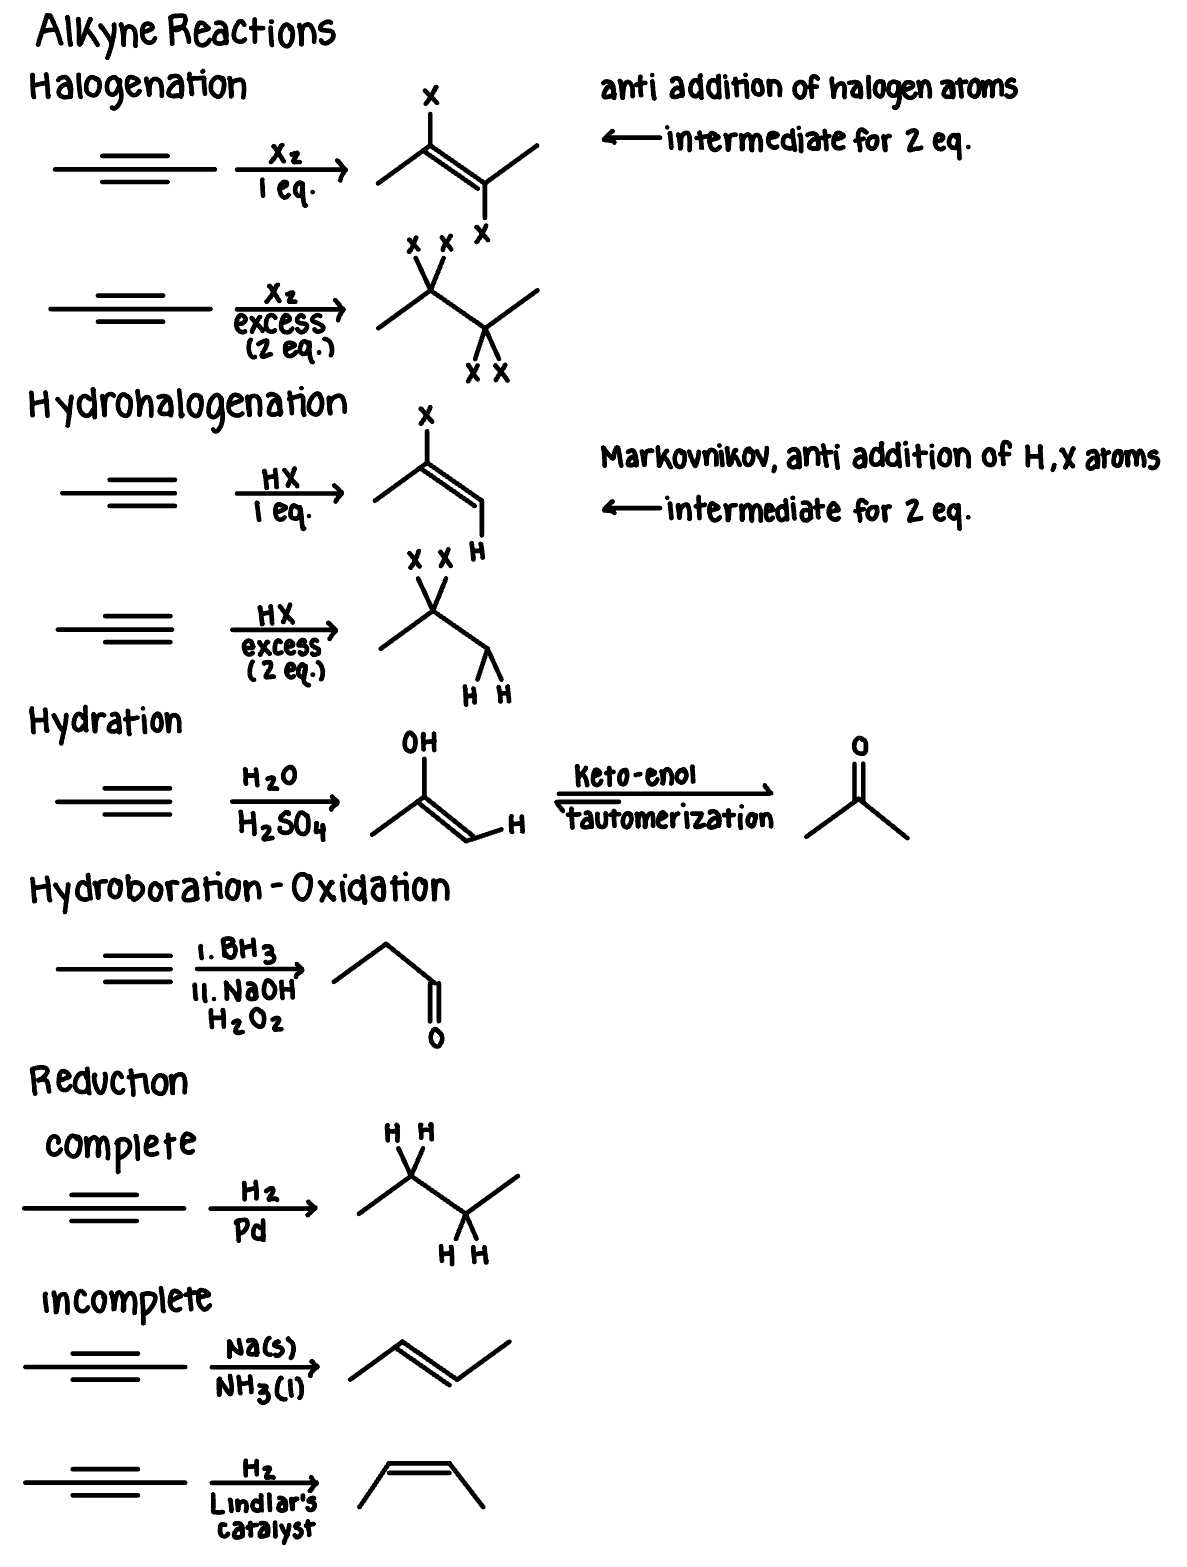 all alkyne reactions, including halogenation, hydrohalogenation, hydration, hydroboration-oxidation, and reduction